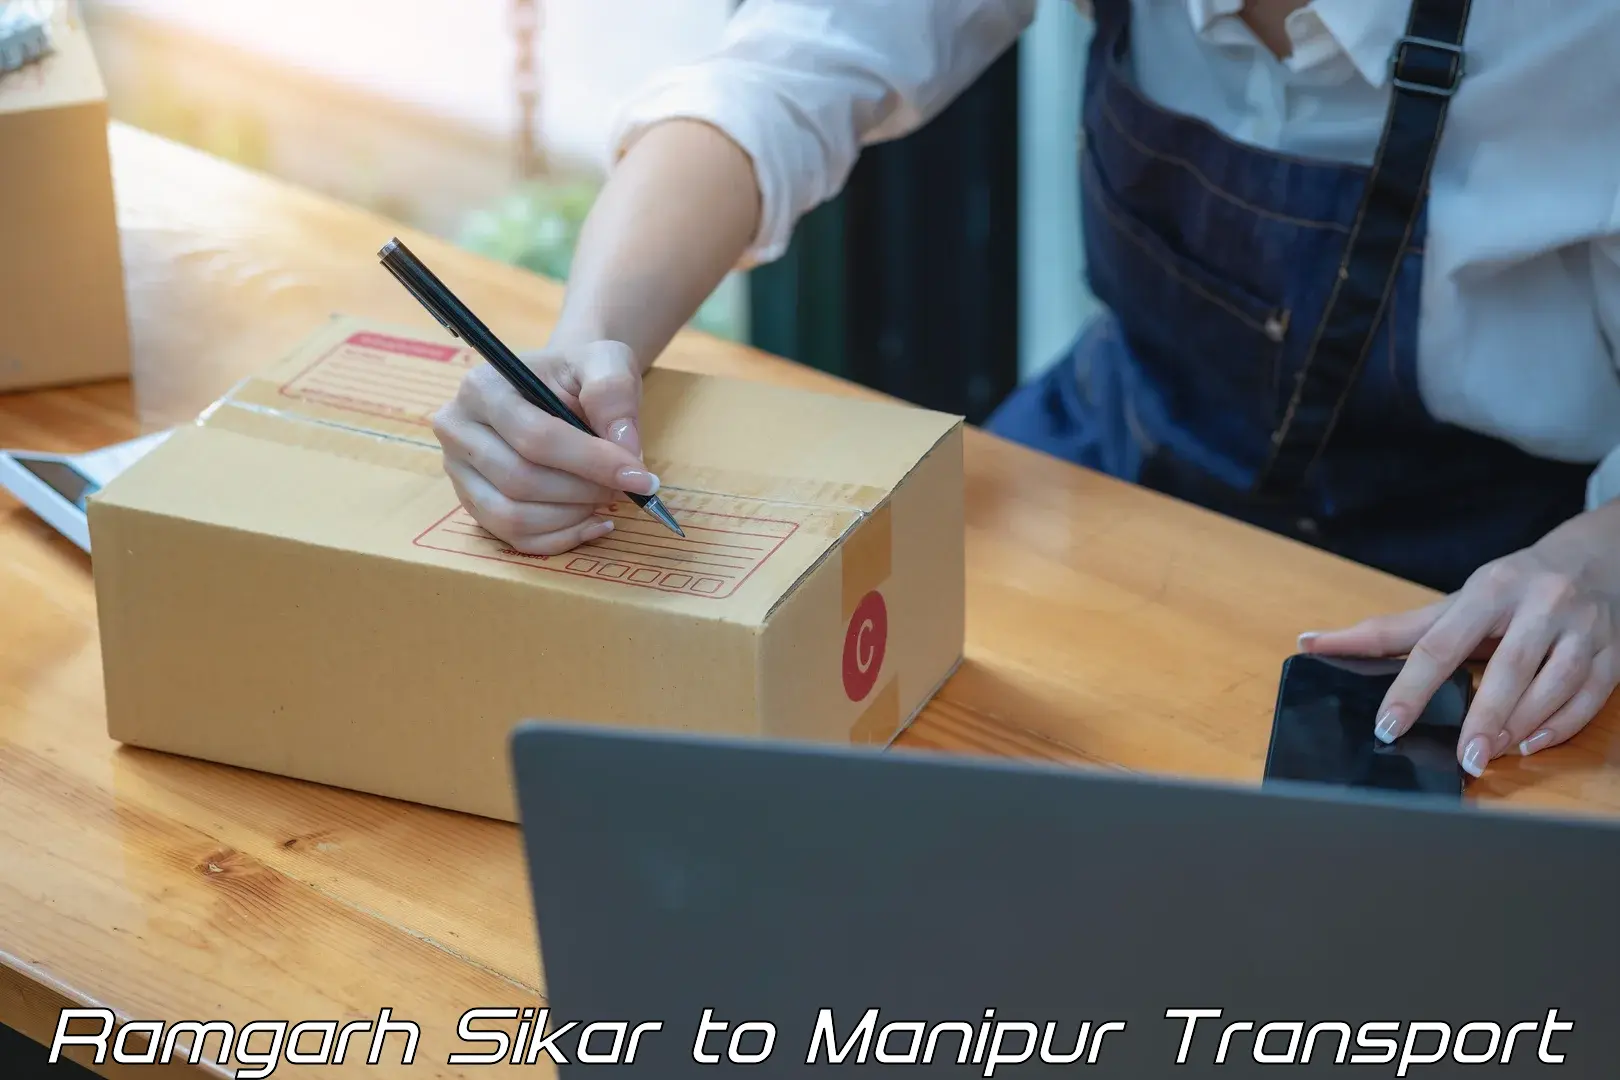 Transport shared services Ramgarh Sikar to Manipur